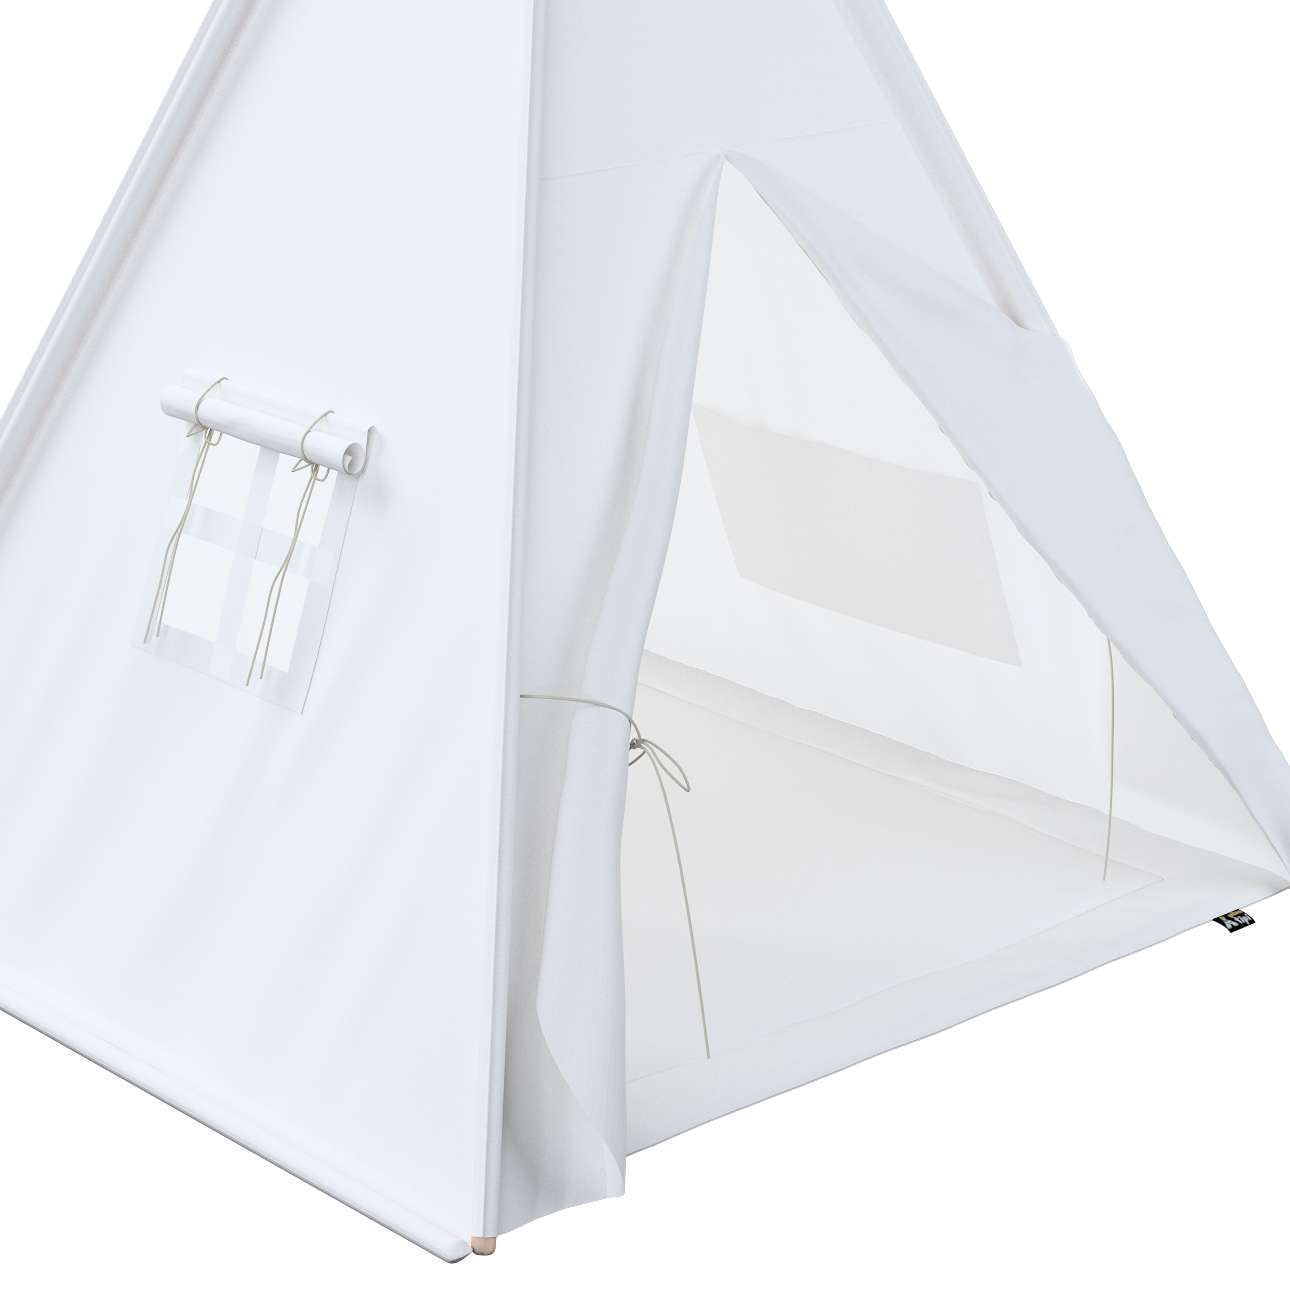 Tepee mat - 110x110 (Happiness) - off white